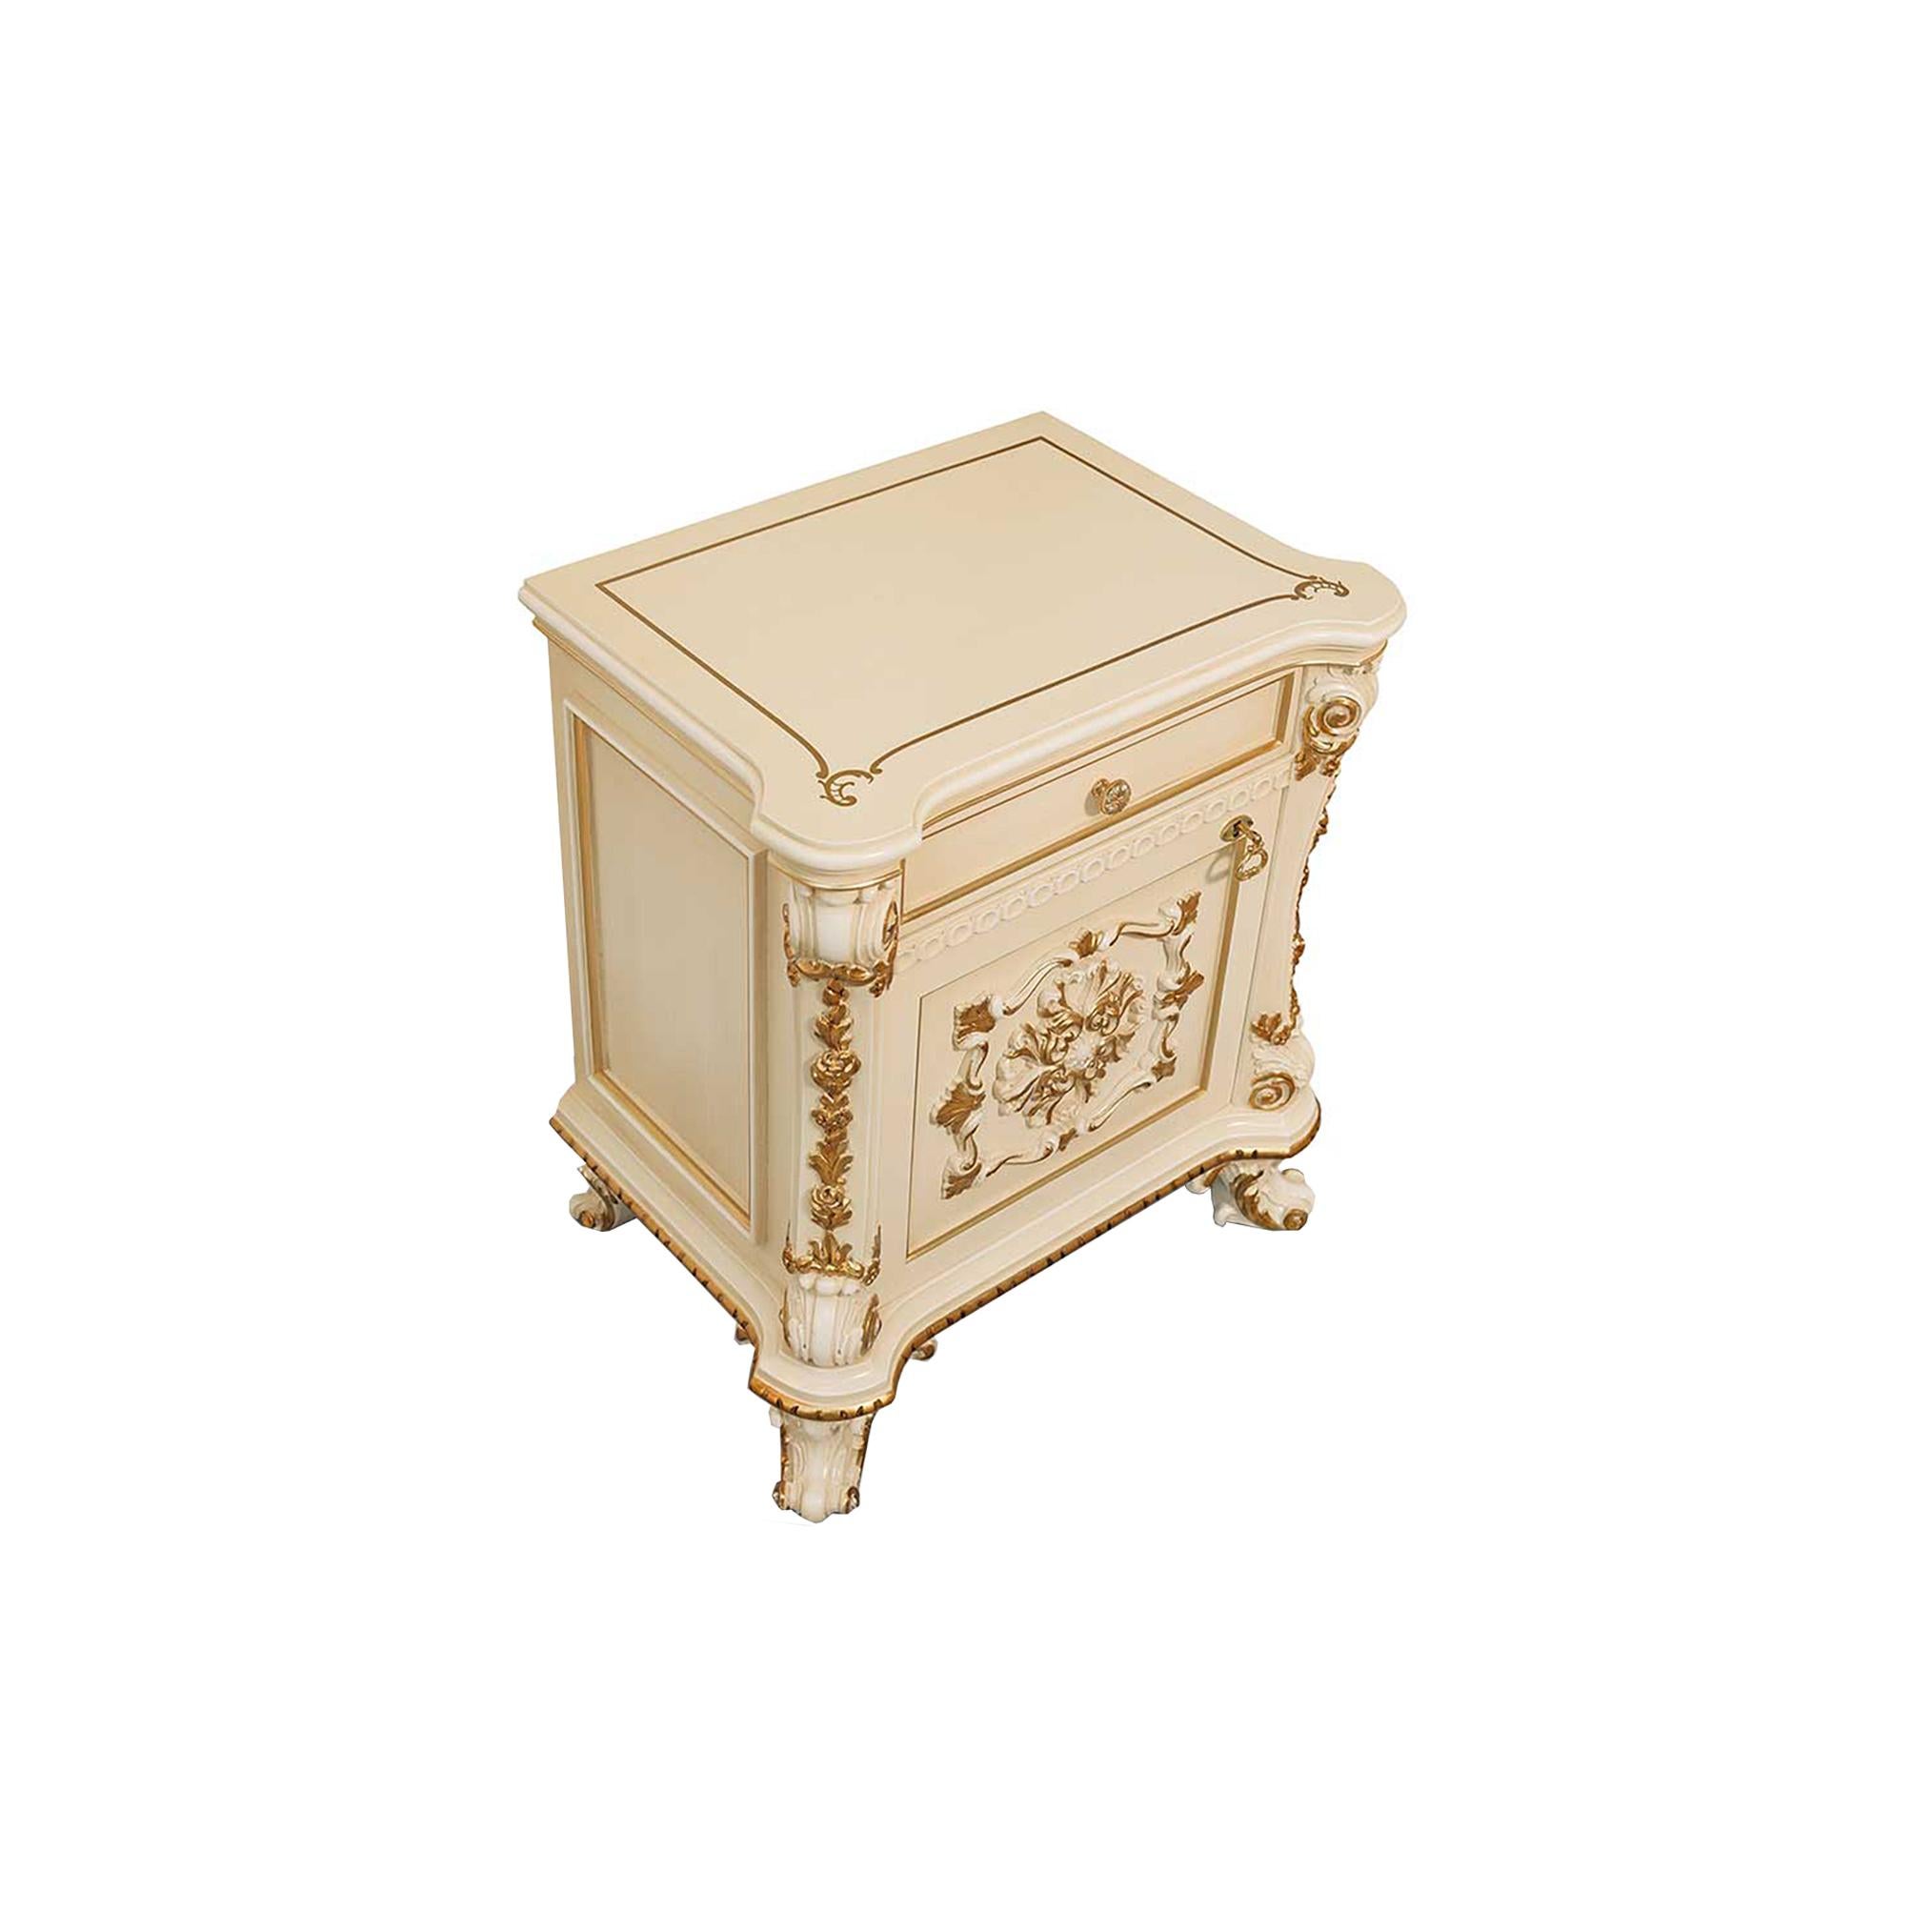 Modenese Gastone Interiors producer is proud to promote this luxury night stand in solid giltwood from its Imperial catalogue. This figured night stand features a lacquered ivory finish, baroque legs and carvings carefully hand-decorated with gold